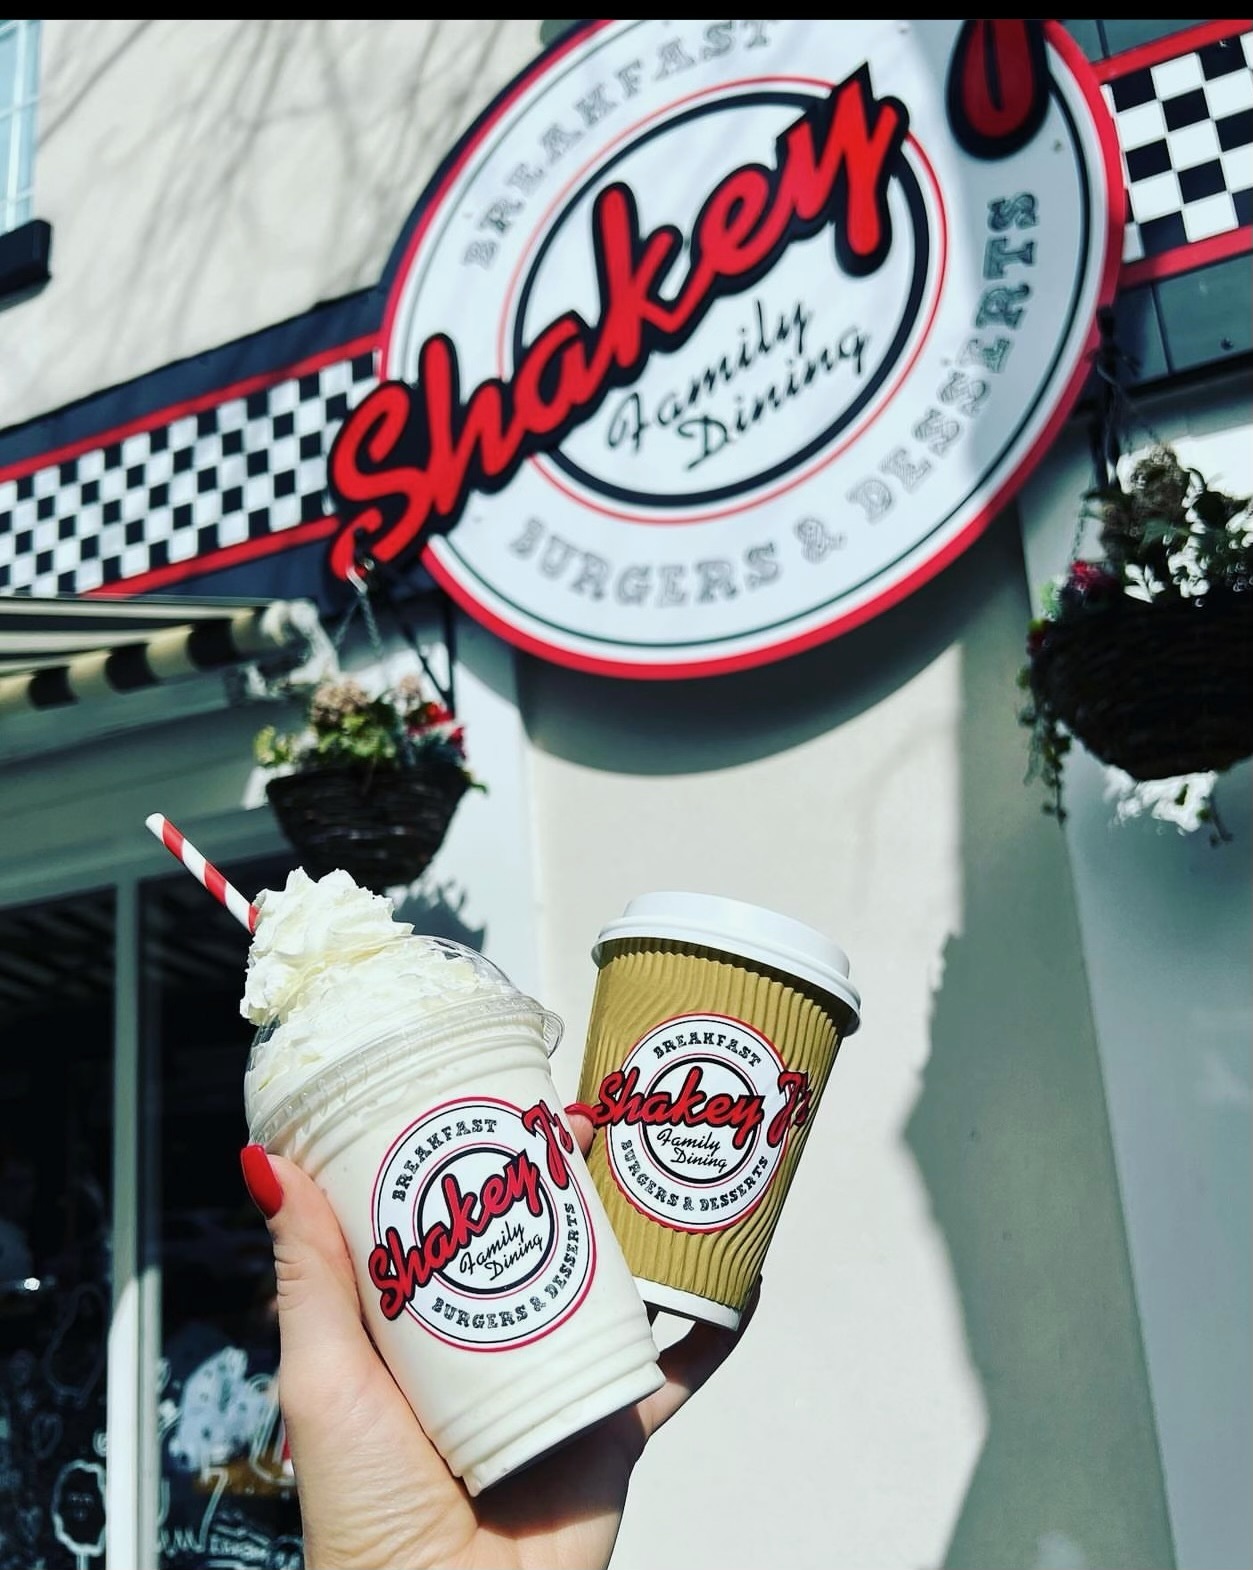 Shakey Js first opened selling milshakes and desserts in 2016 